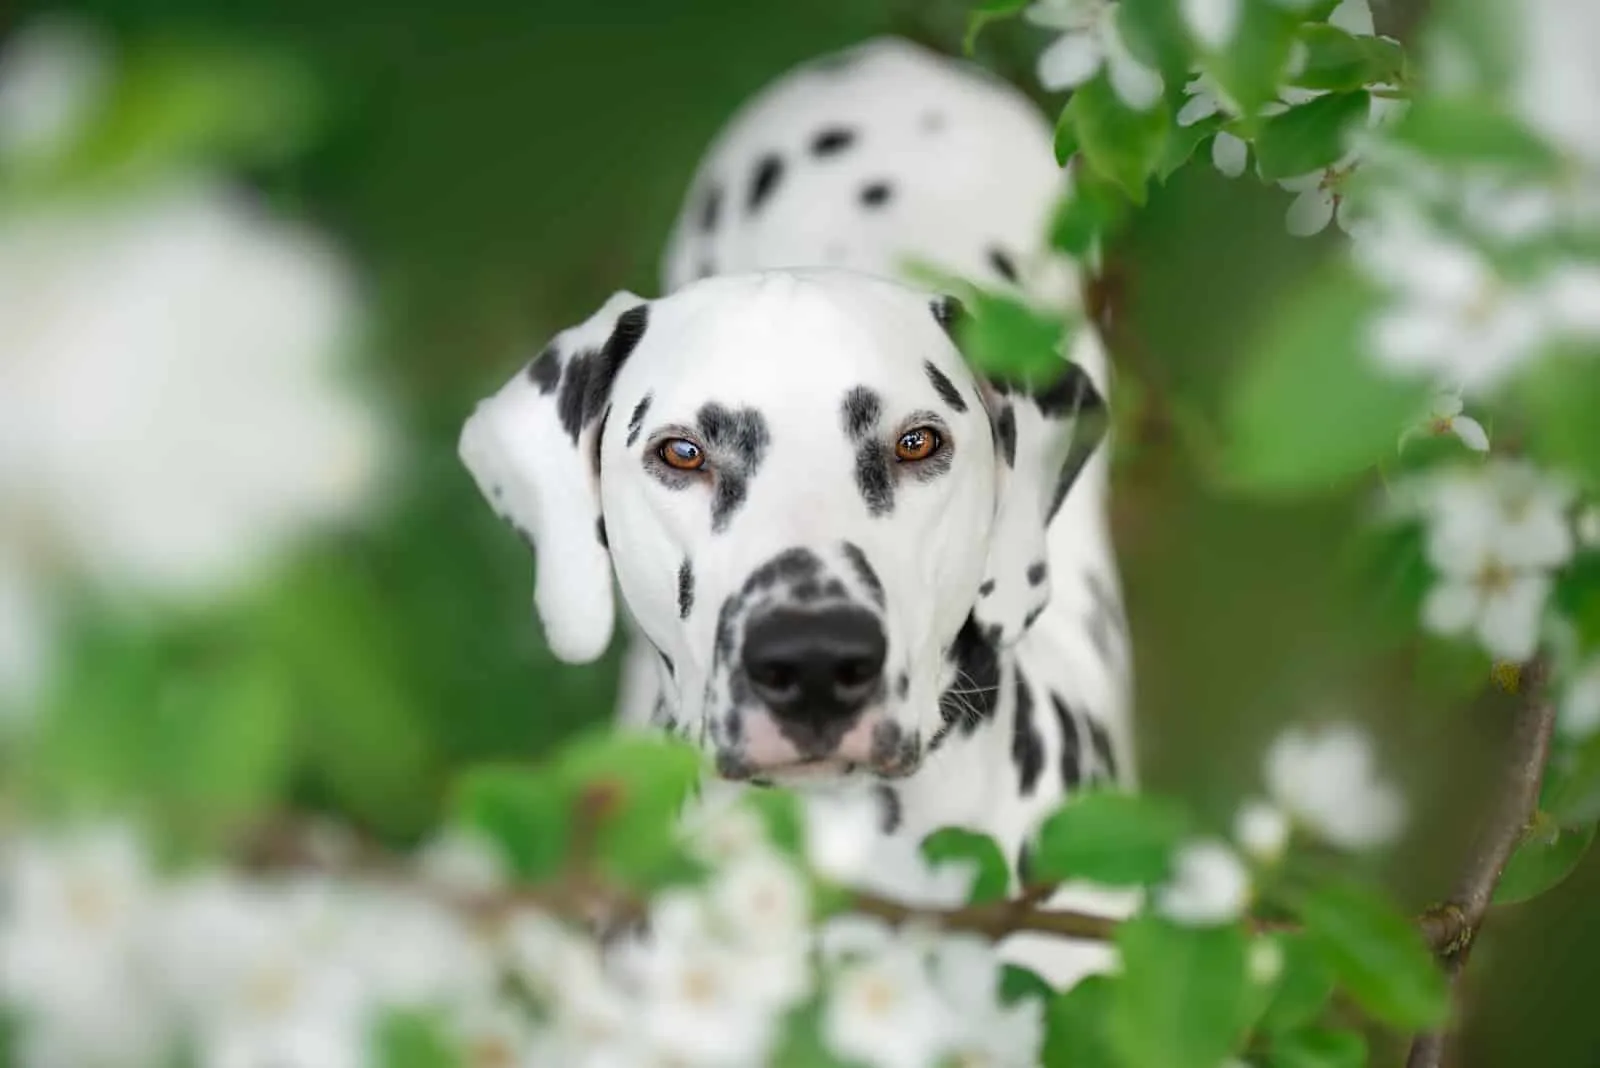 Dalmatian dog closeup portrait in green leaves and flowers